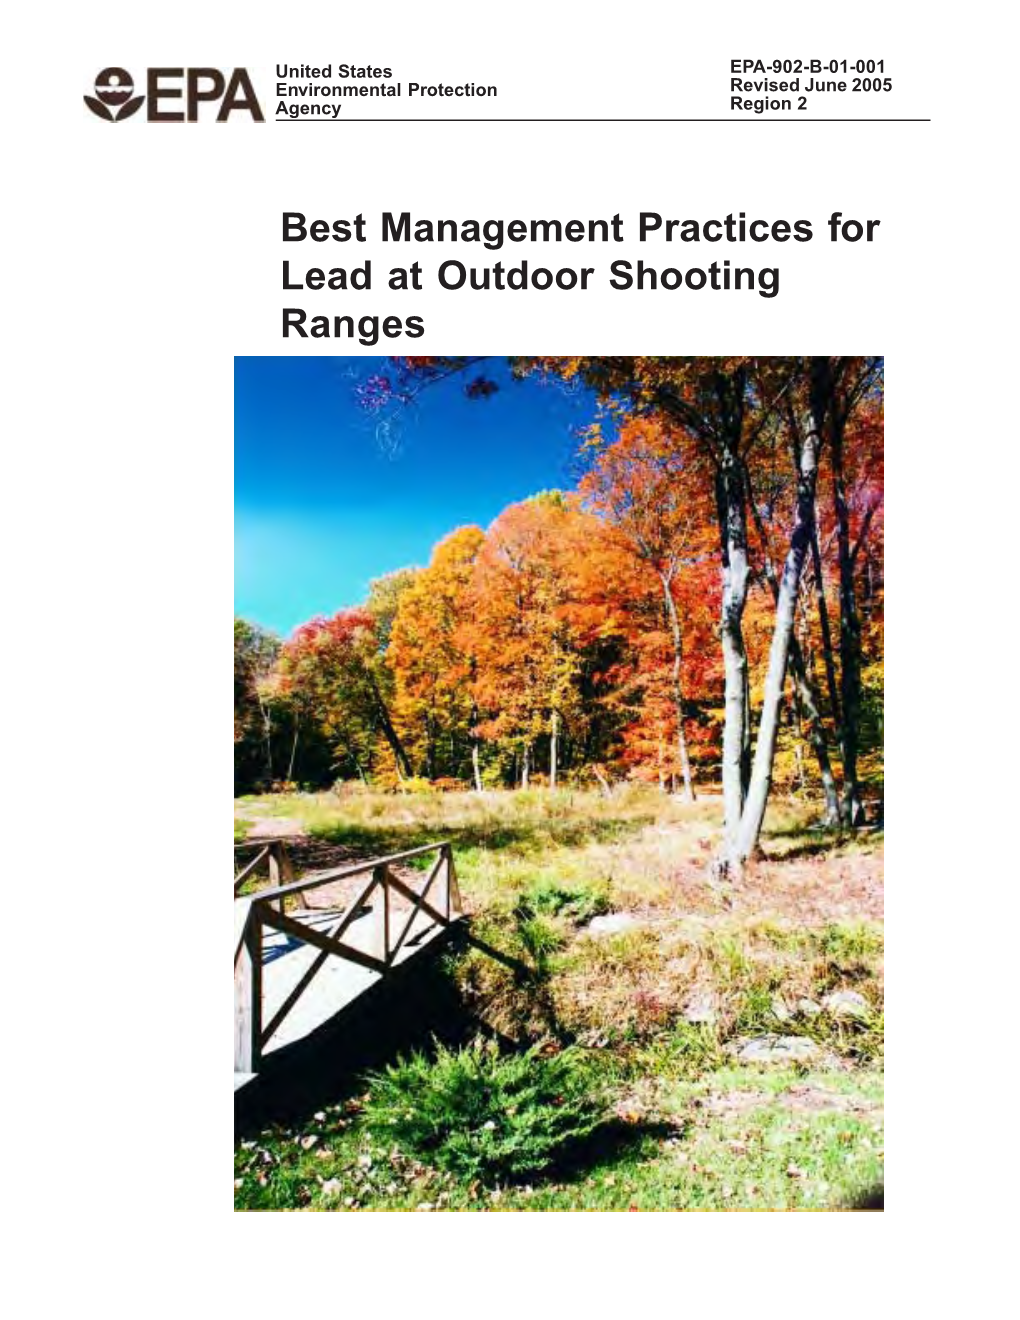 Best Management Practices for Lead at Outdoor Shooting Ranges for Additional Copies of This Manual, Please Contact